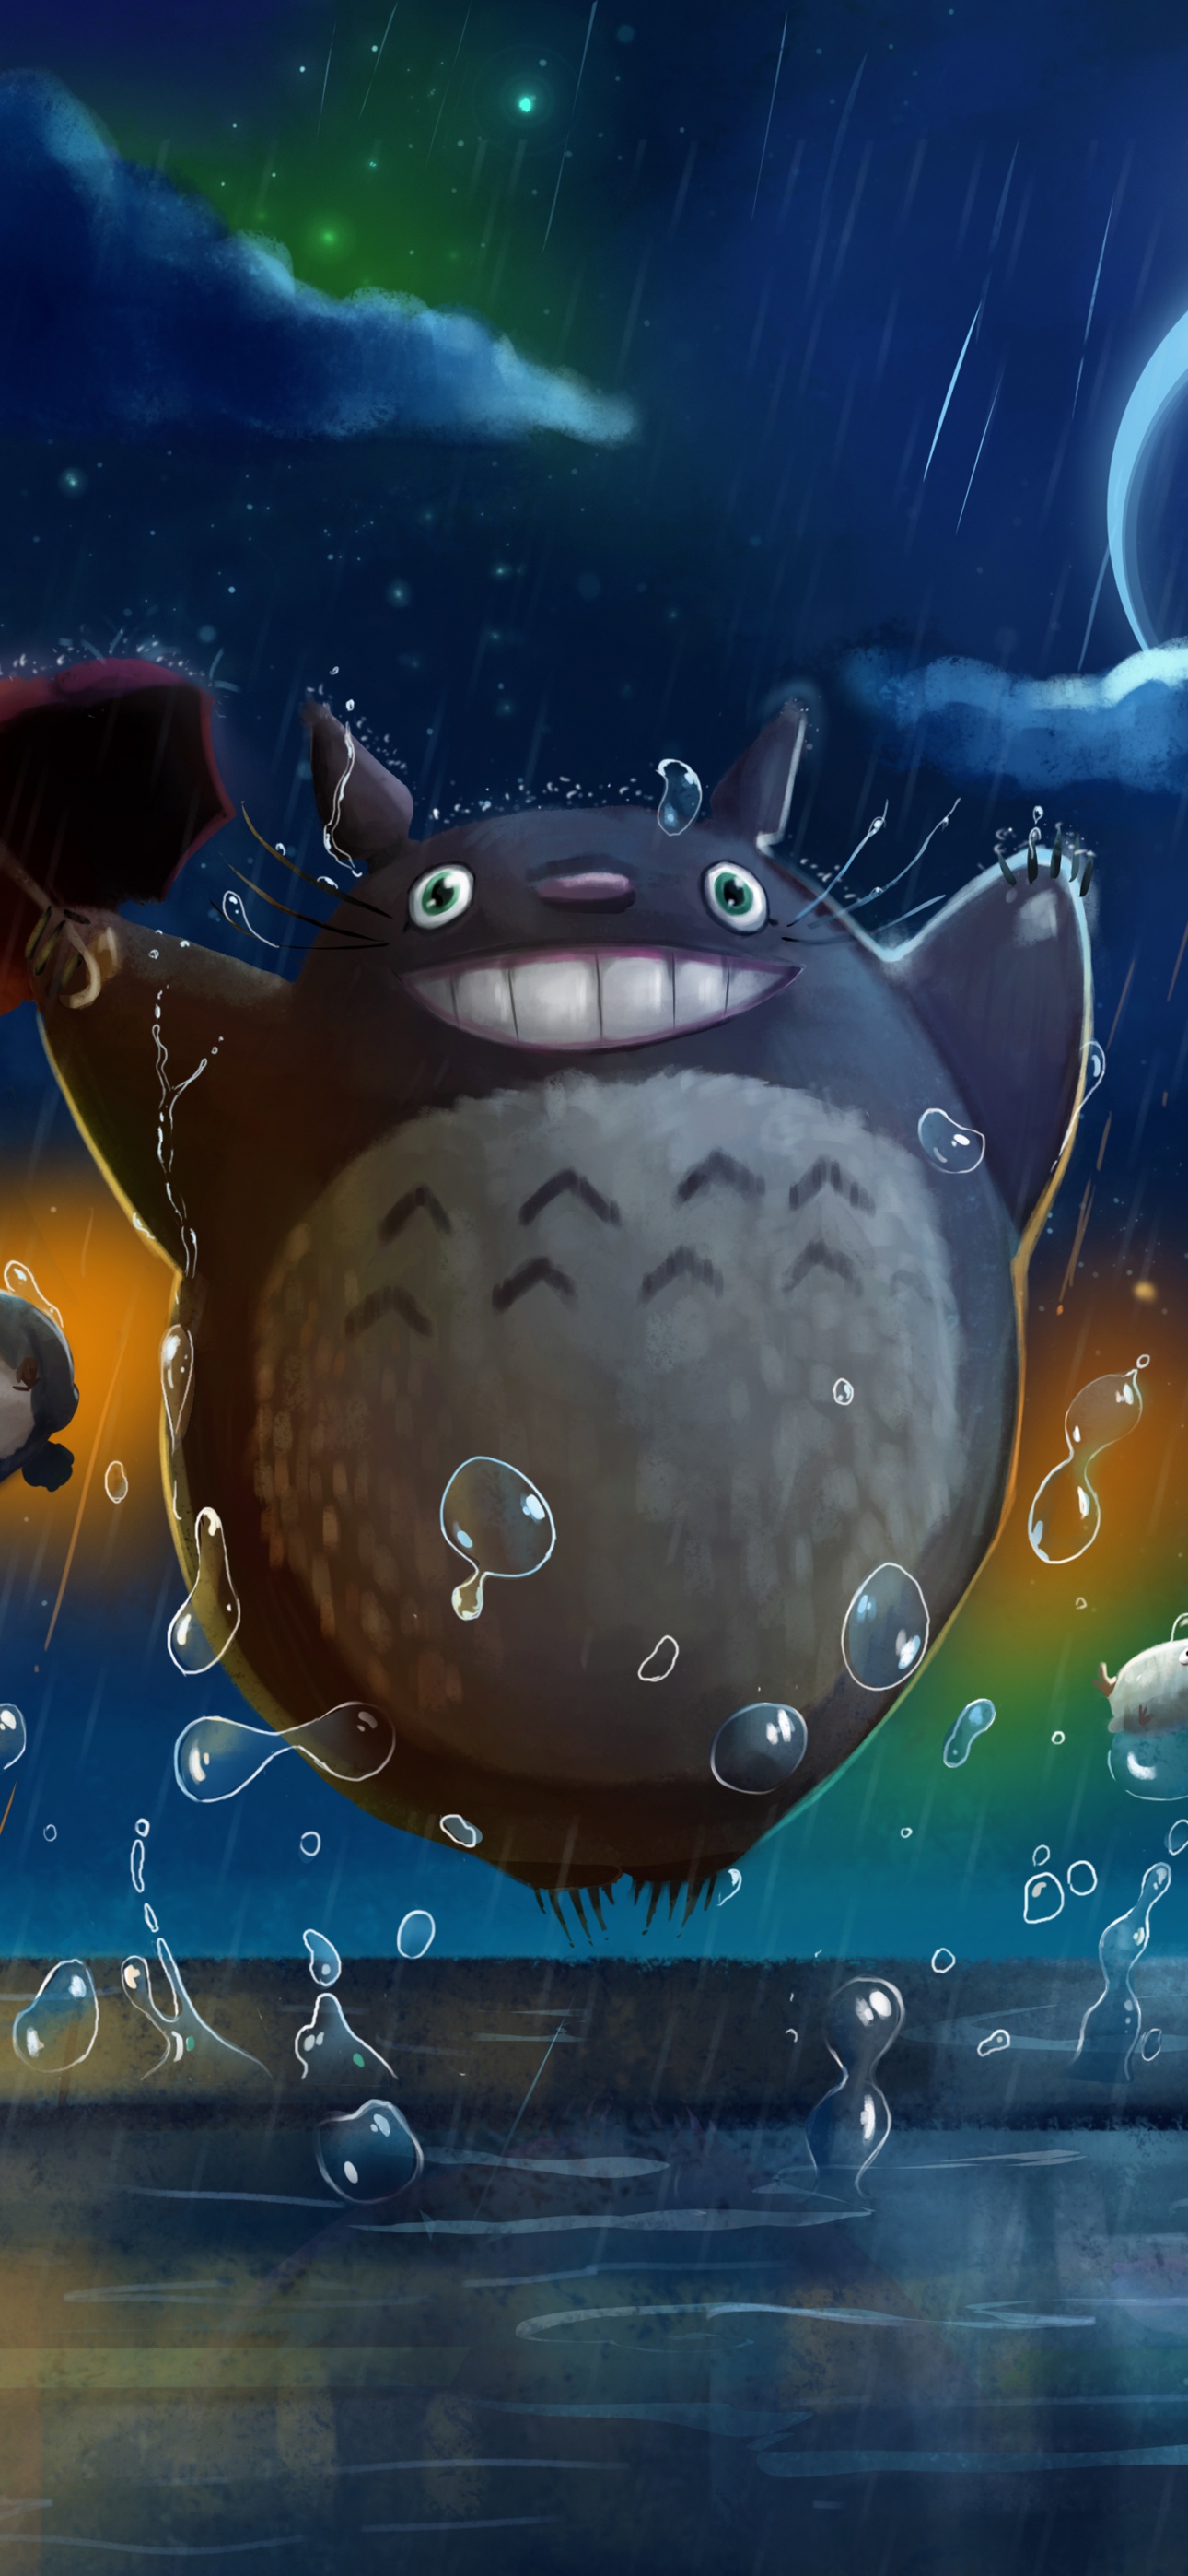 Jonny on Twitter My Neighbour Totoro phone wallpaper which I really like  maybe you will as well httptcogz0F1vK97L  Twitter